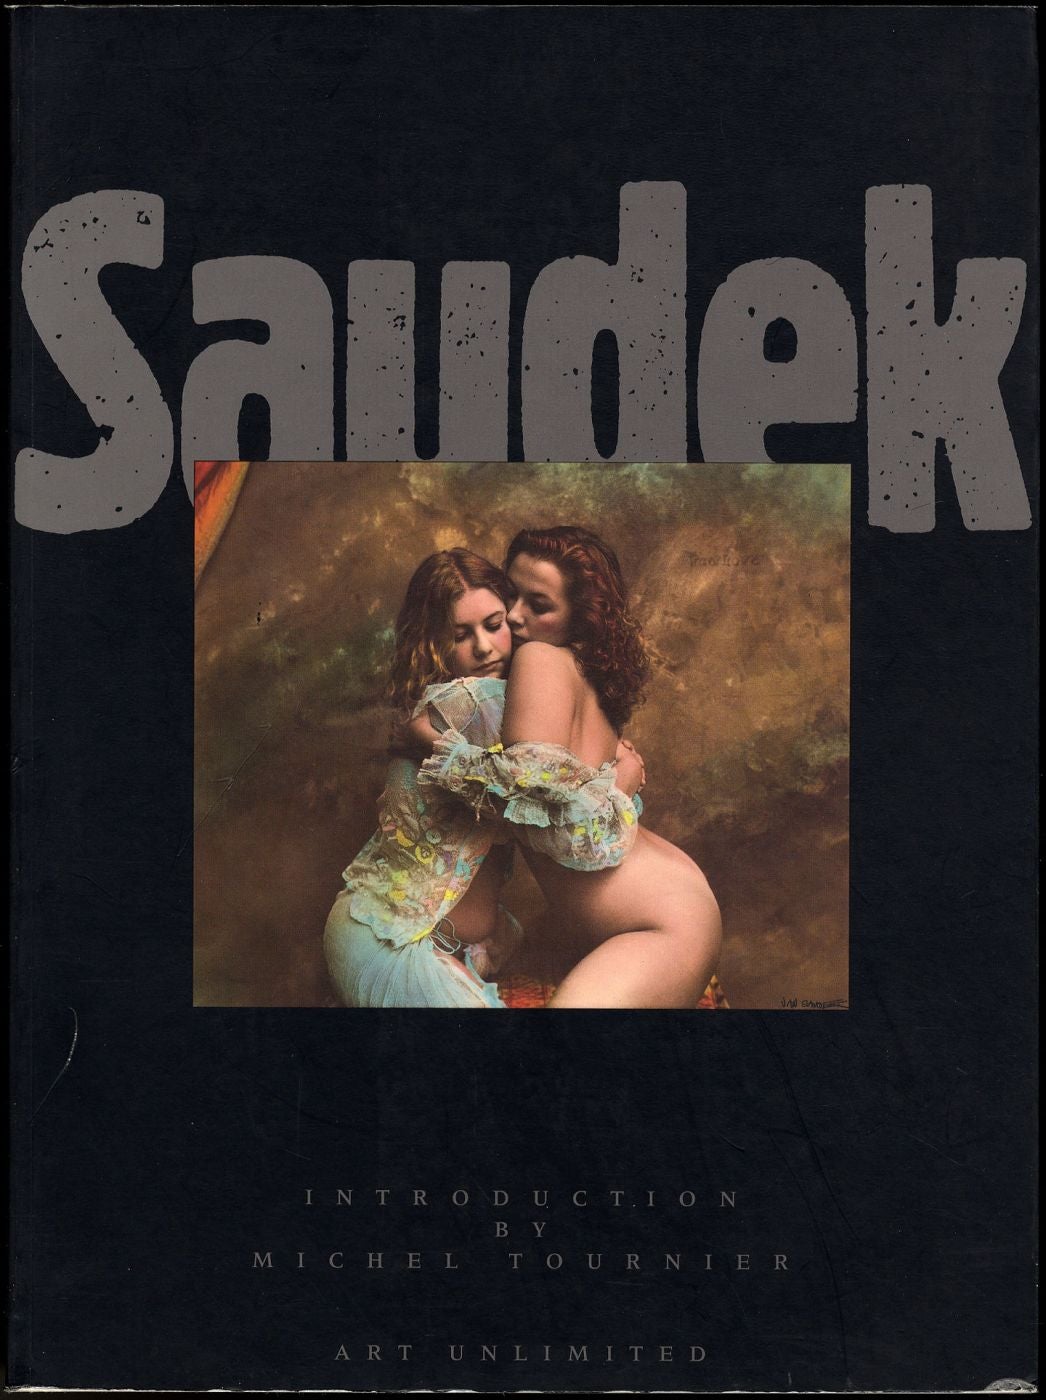 Jan Saudek: Life, Love, Death and Other Such Trifles